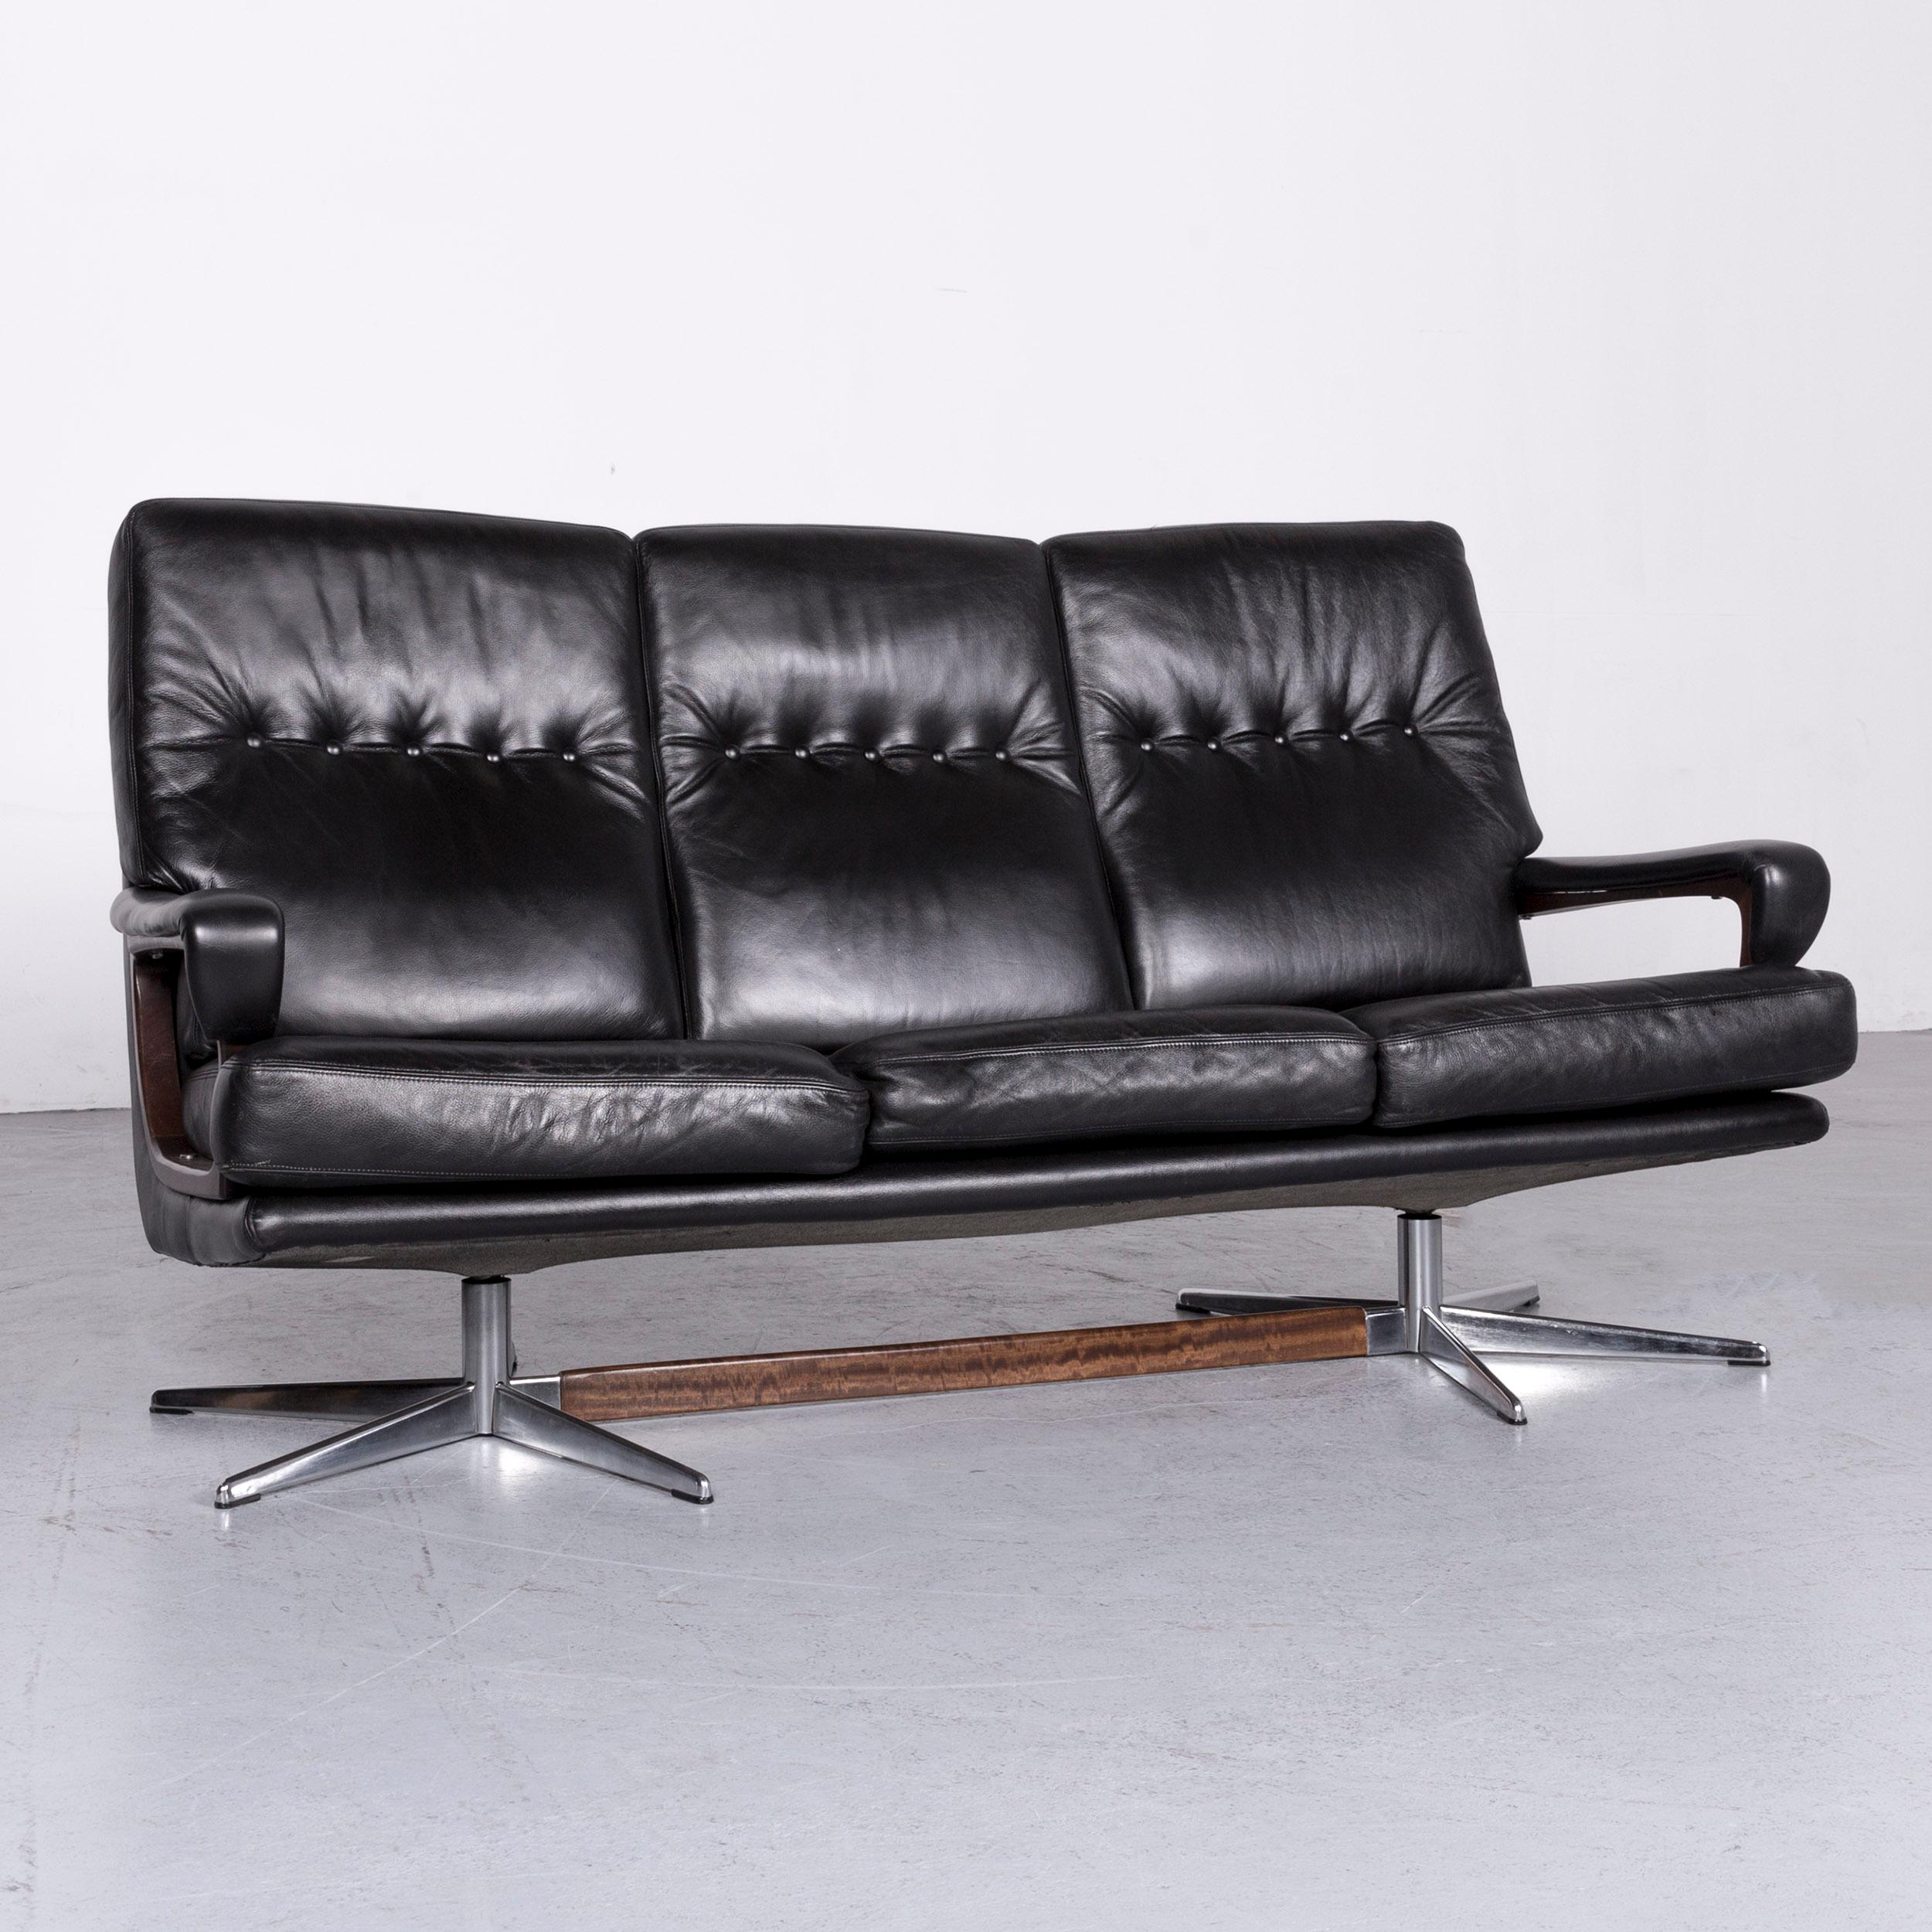 We bring to you a Strässle King designer leather sofa black three-seat couch.